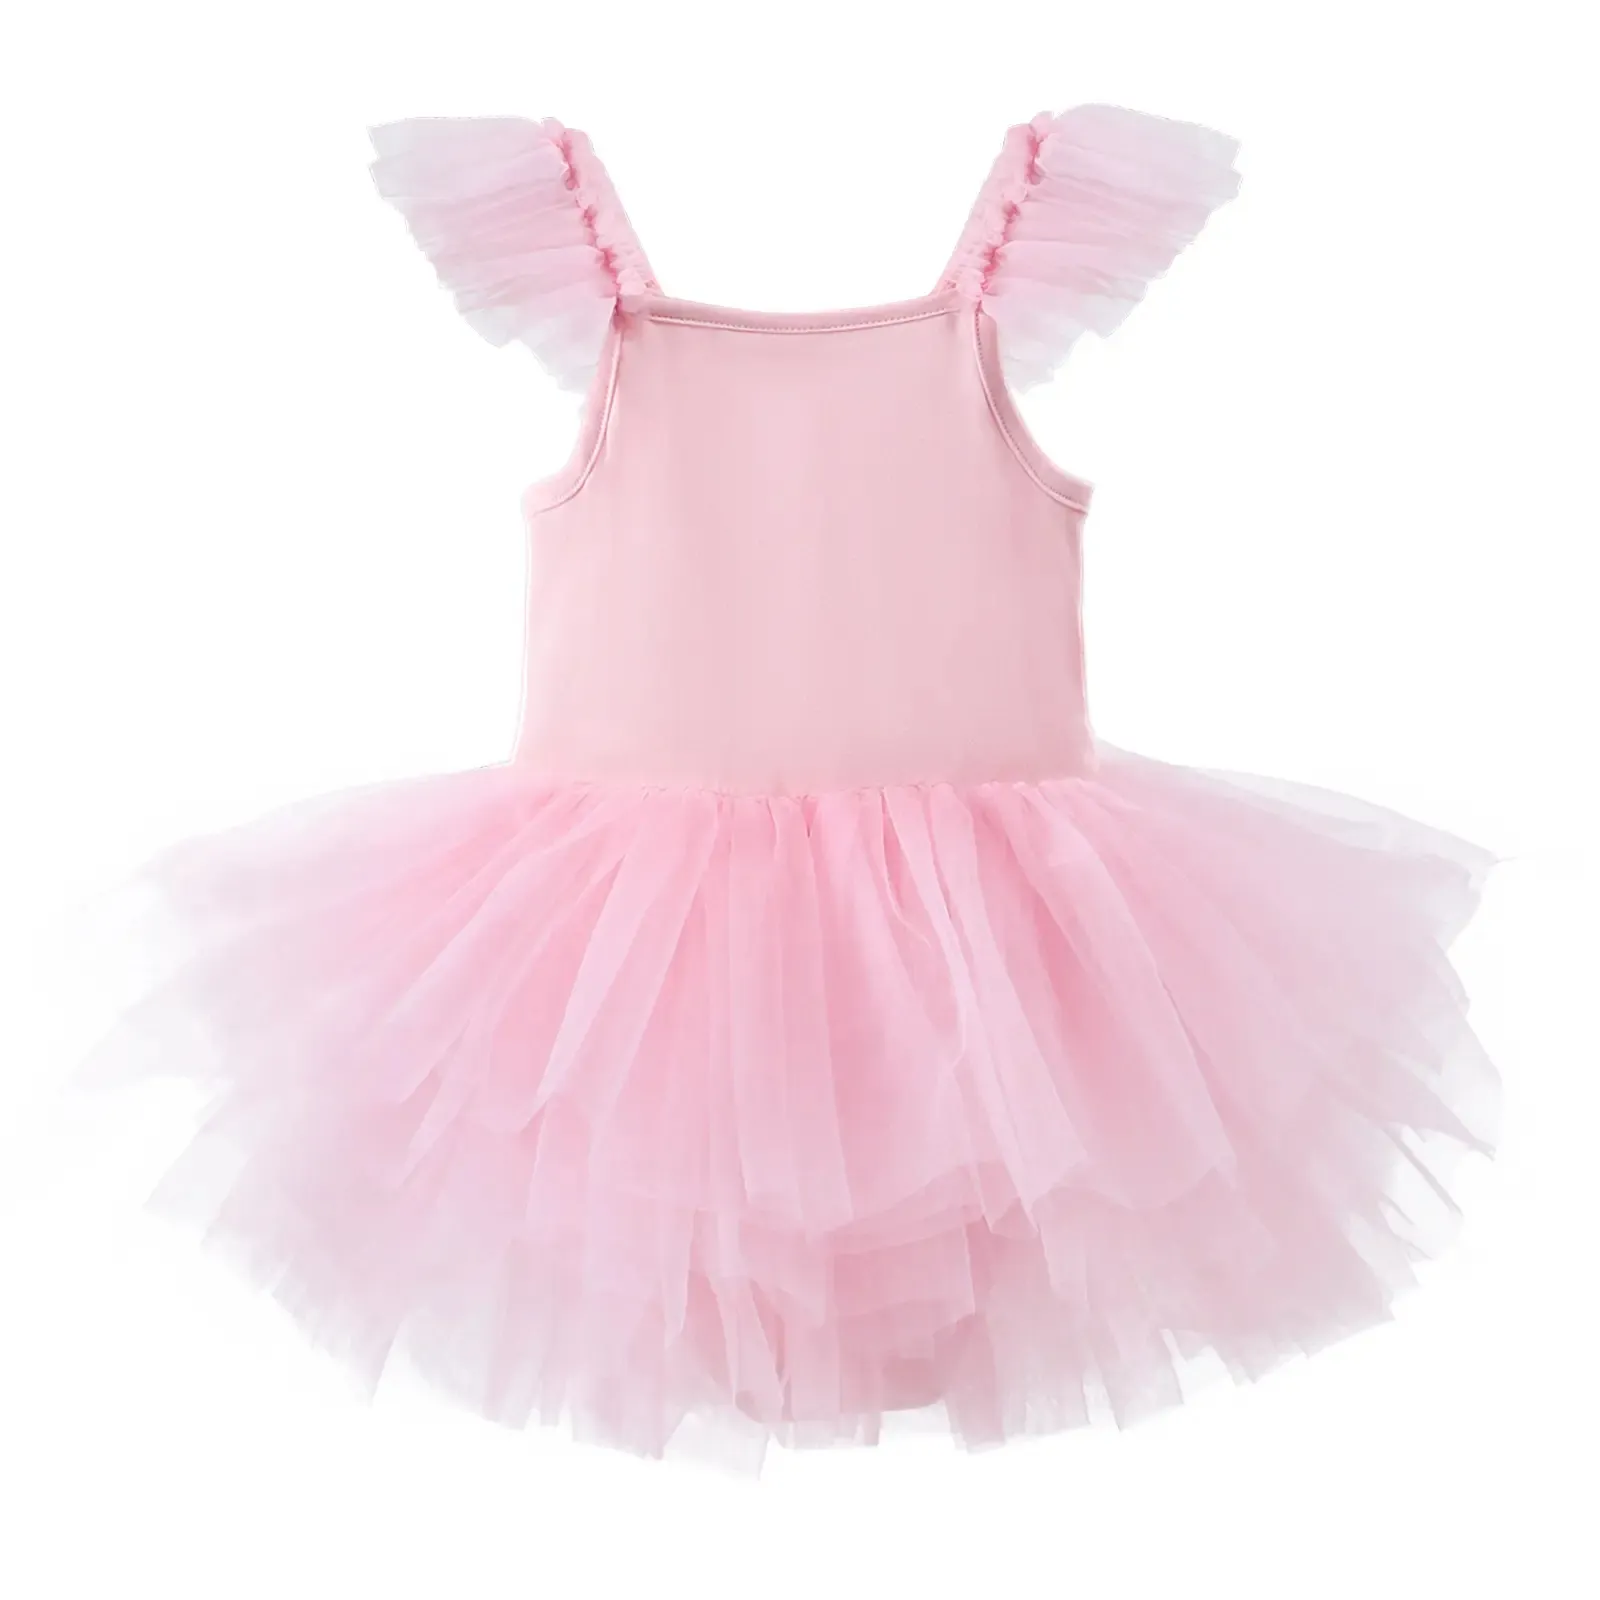 Good Quality Children Tutu Dress Girls Cotton Knit Top and Puffy Tulle Skirts Pink kids tutu skirts Bodycon Dance wear Clothes